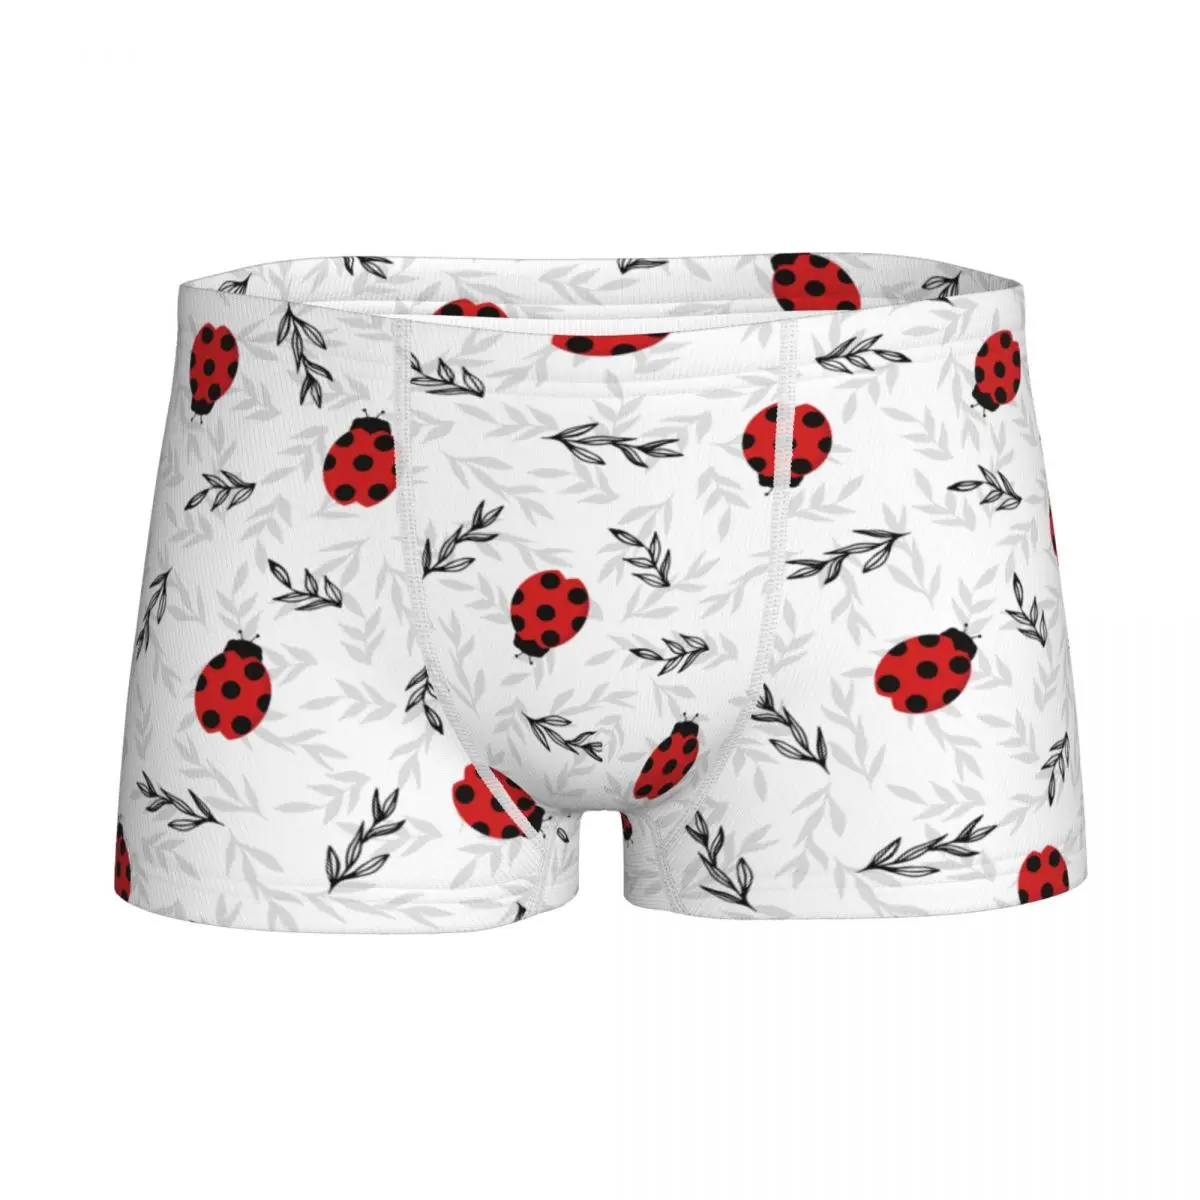 

Ladybug Insect Lover Children Boys Underwear Cotton Boxer Brief Panties Ladybird Print Teenager Boxer Fashion Underpants Shorts